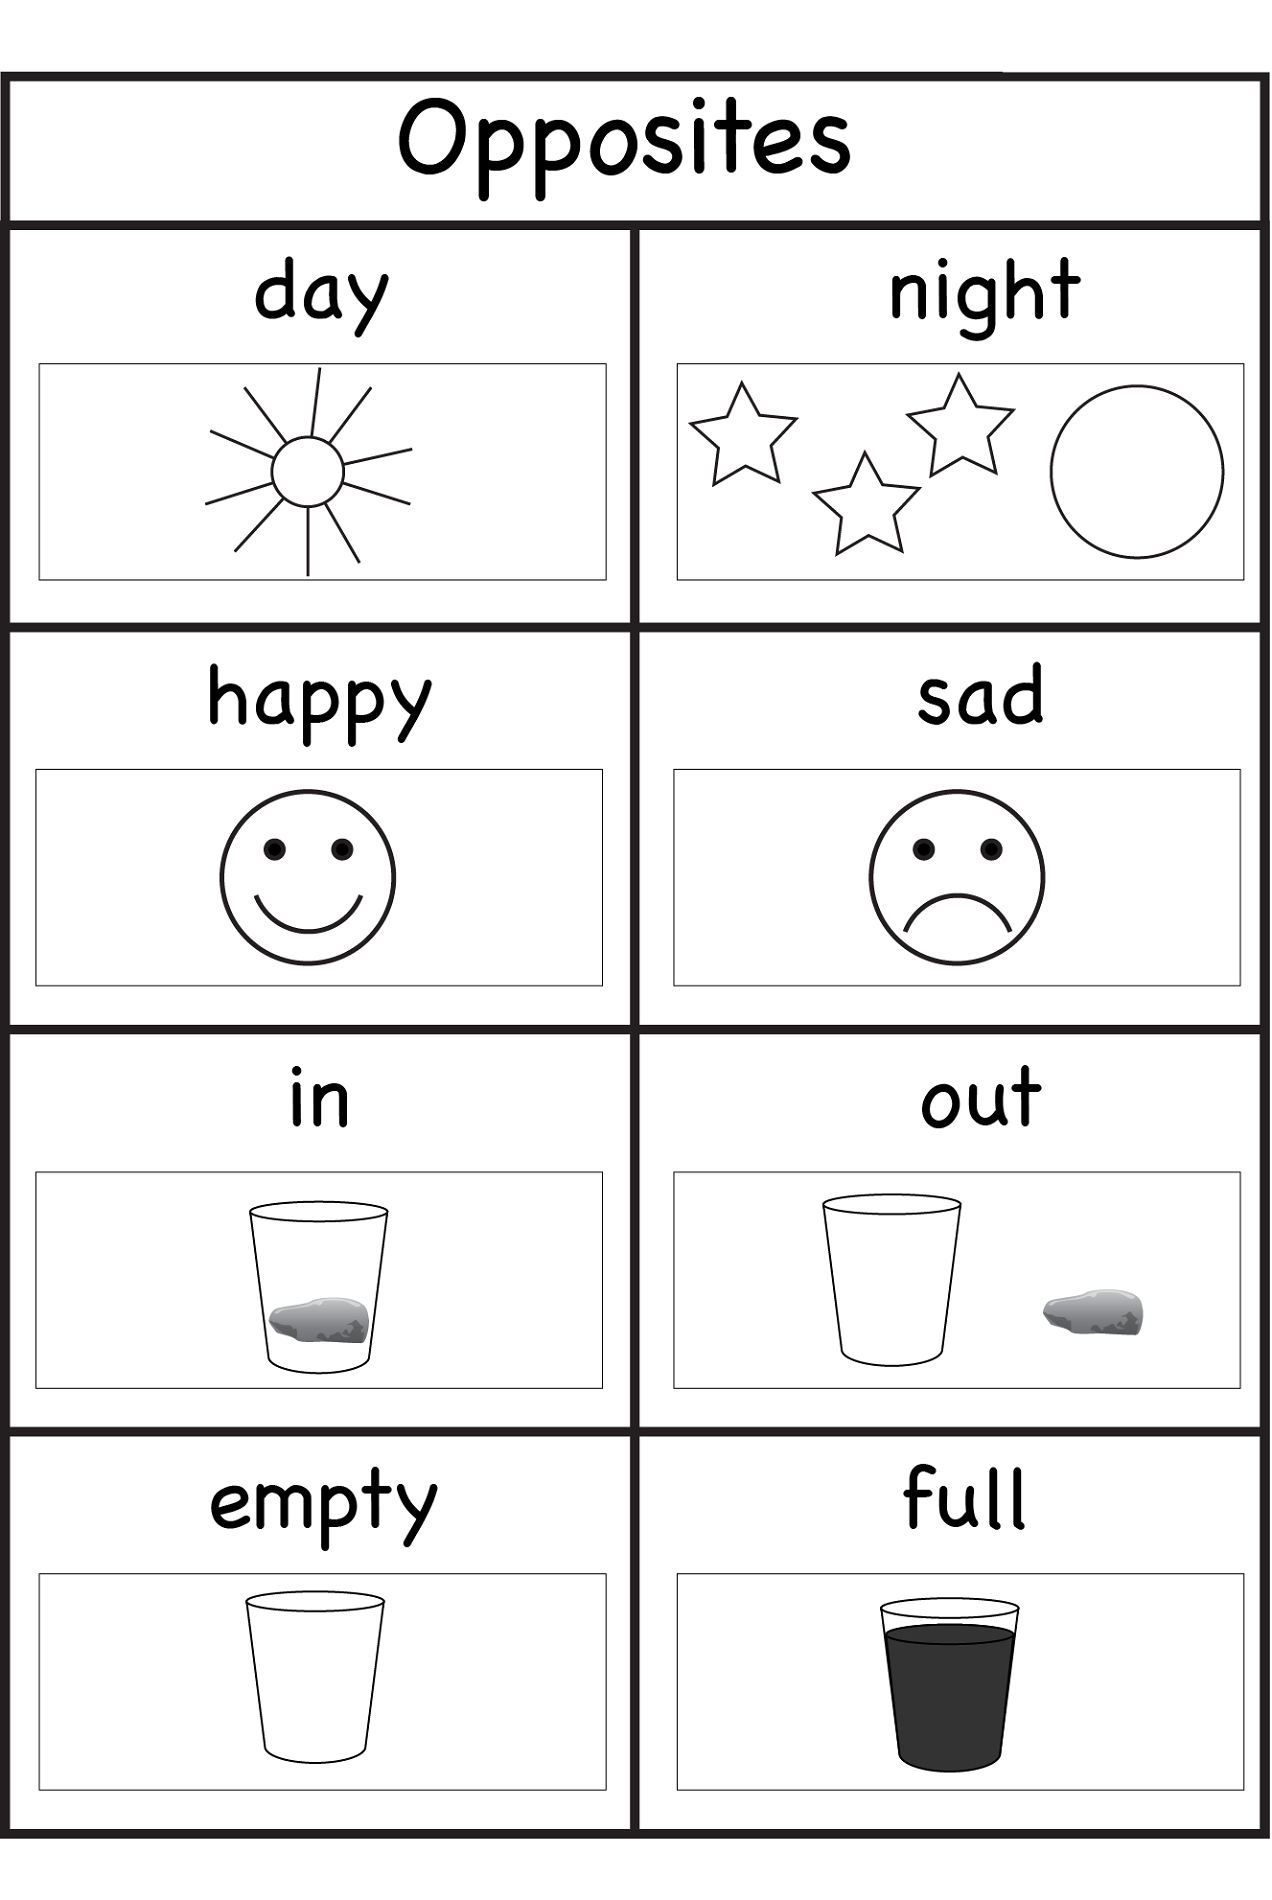 worksheets for 4 year olds opposites